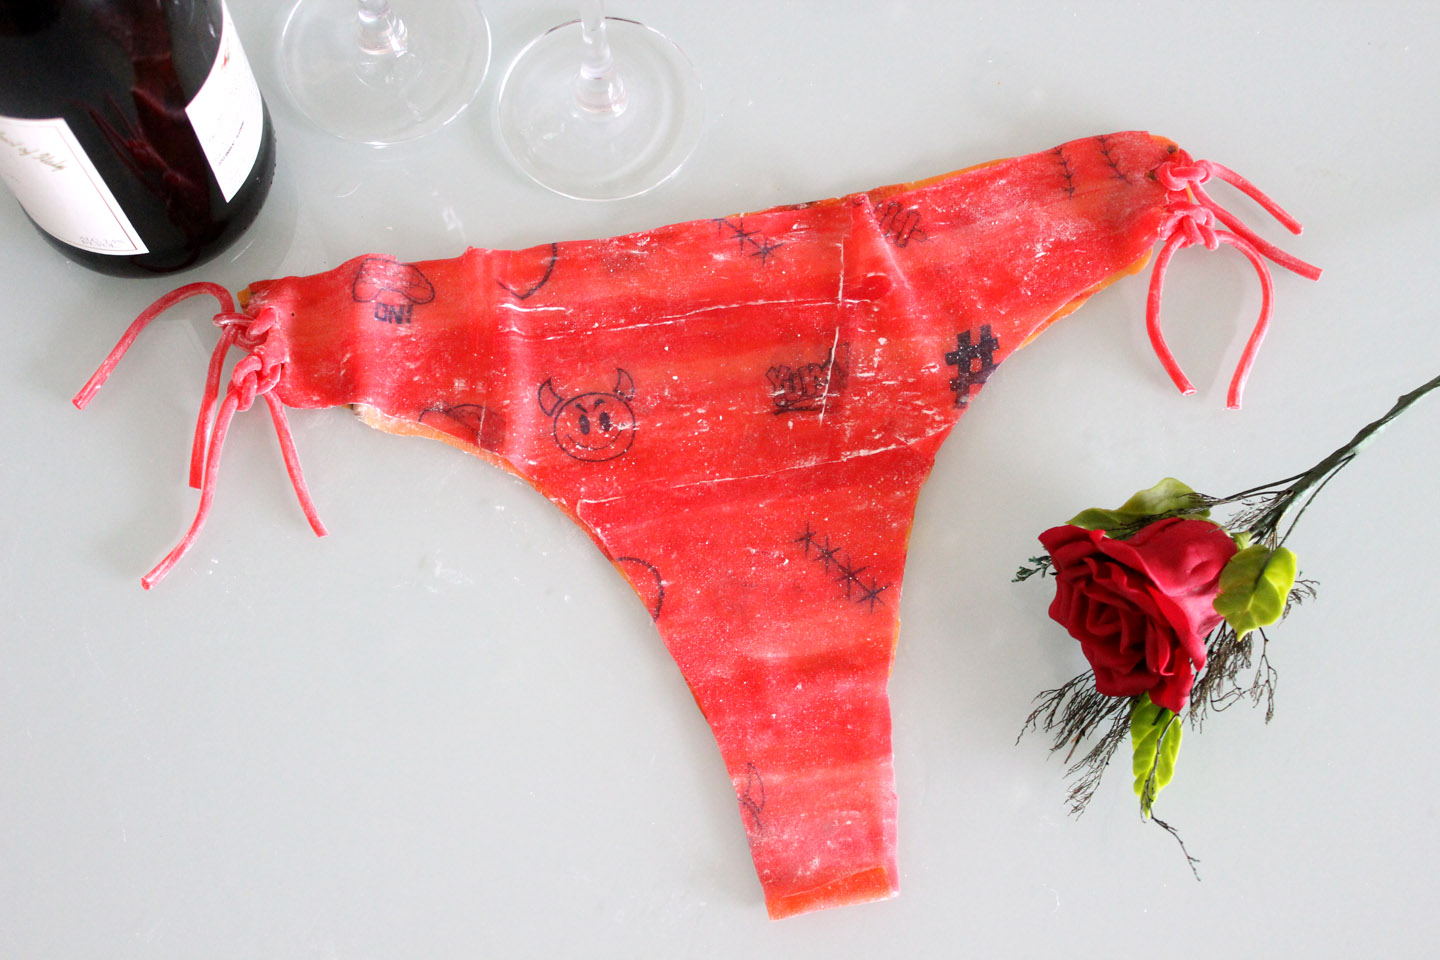 Watch: How to make Edible underwear to nibble off your partner